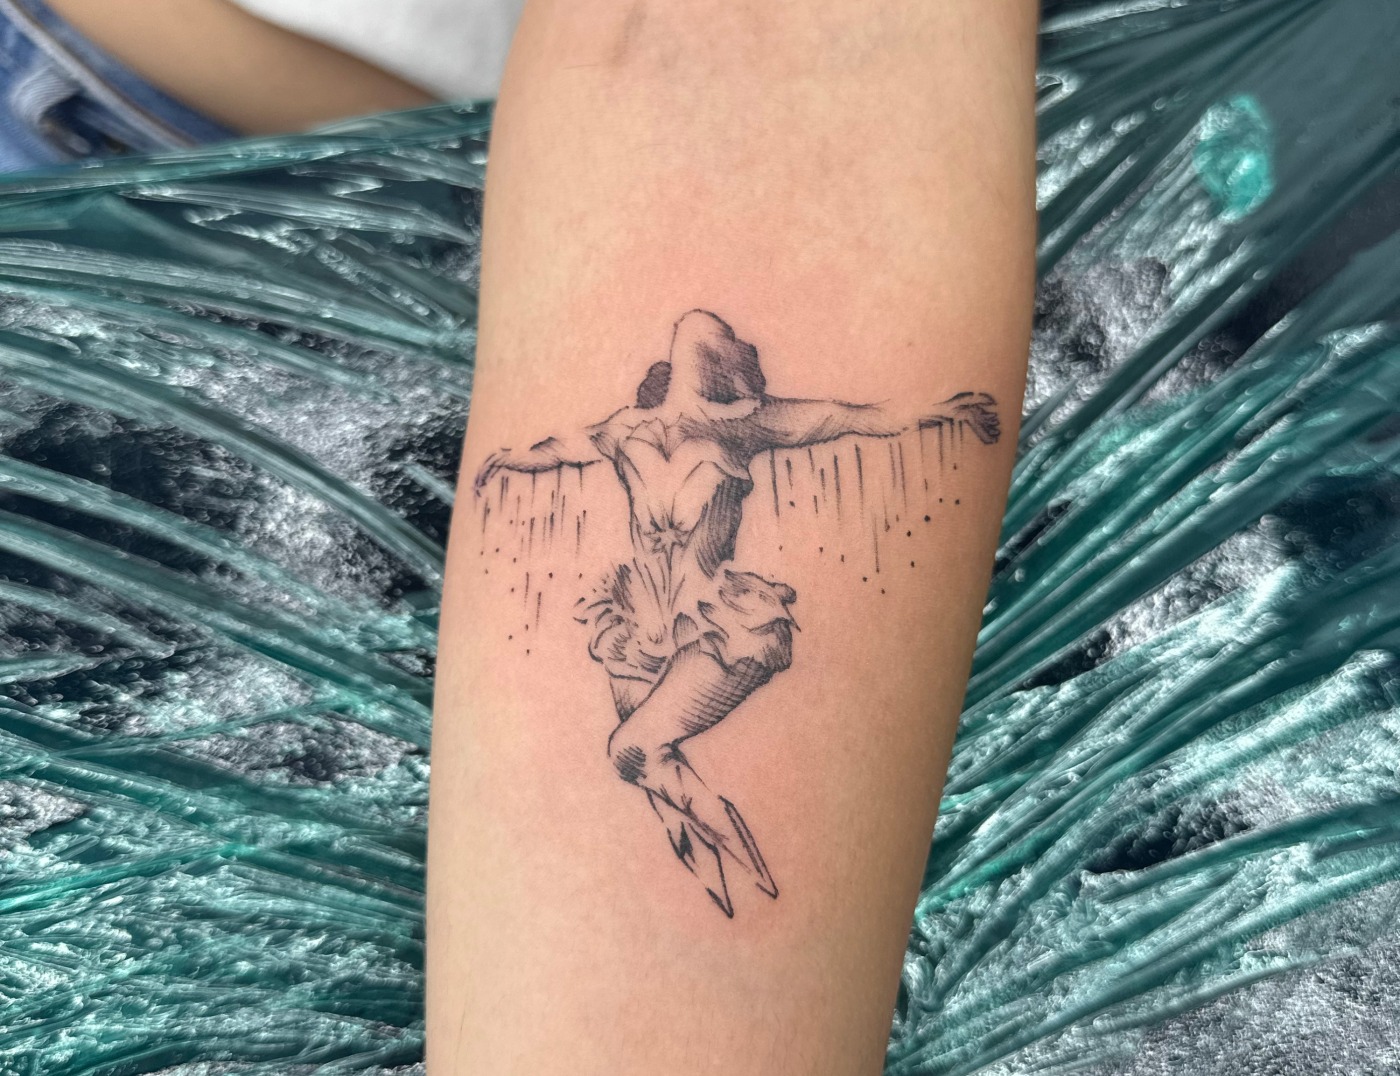 Woman Ballerina Black & Gray Realism Tattoo By Choze At Iron Palm Tattoos. Female ballerina or dance tattoos symbolize grace & femininity. Ballet is considered the most elegant form of dance. We're open late night most nights until 2AM. Call 404-973-7828 or stop by for a free consultation.